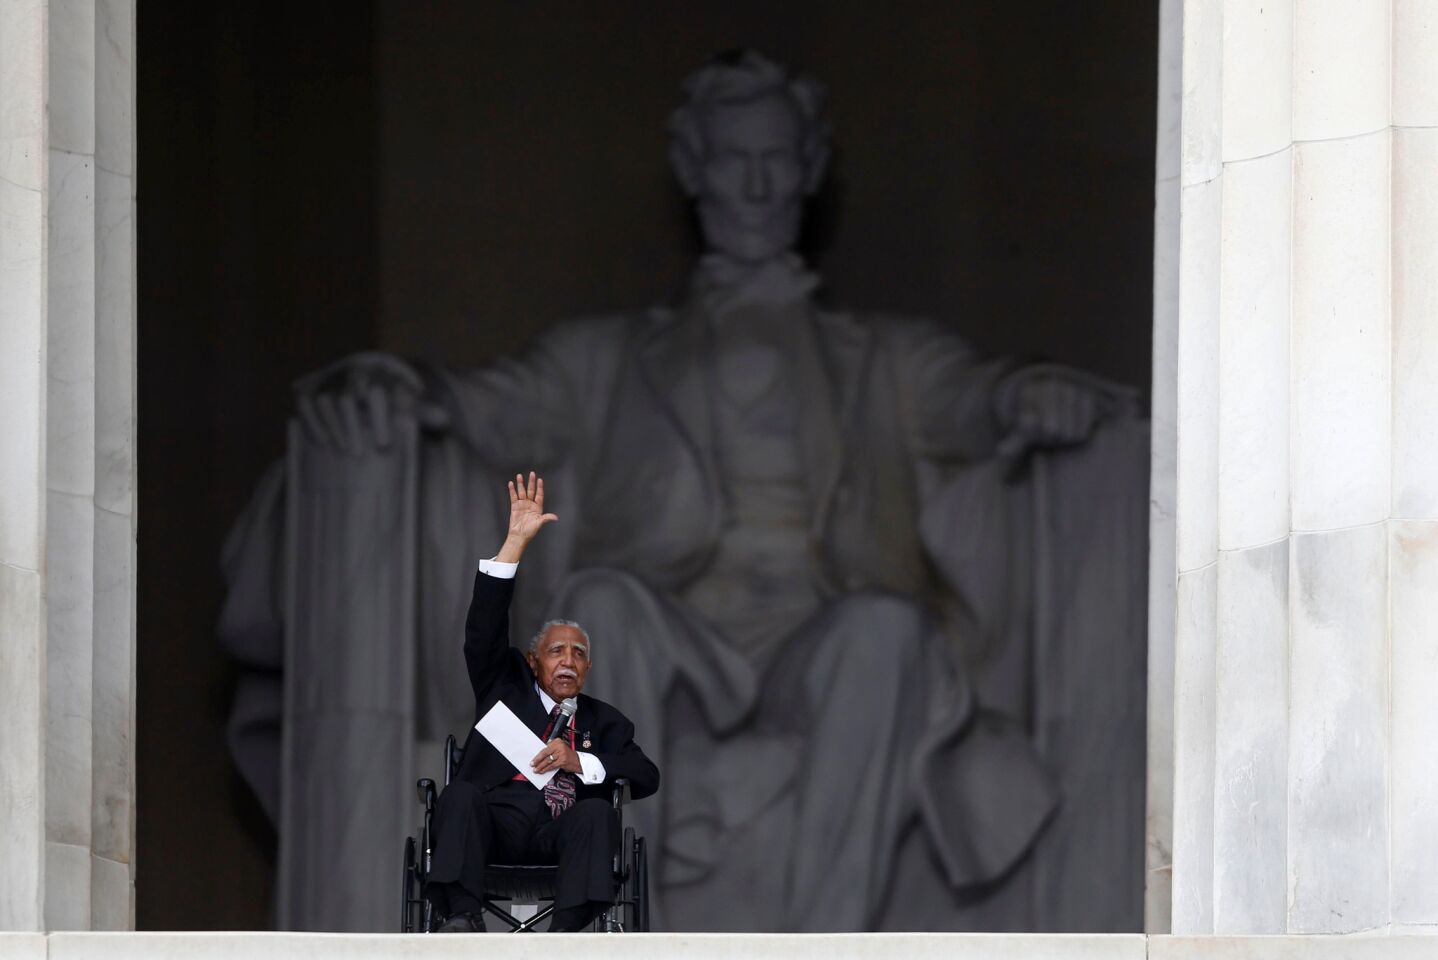 Rev. Joseph Lowery, former president of the Southern Christian Leadership Conference, speaks at the 50th Anniversary of the March on Washington at the Lincoln Memorial.